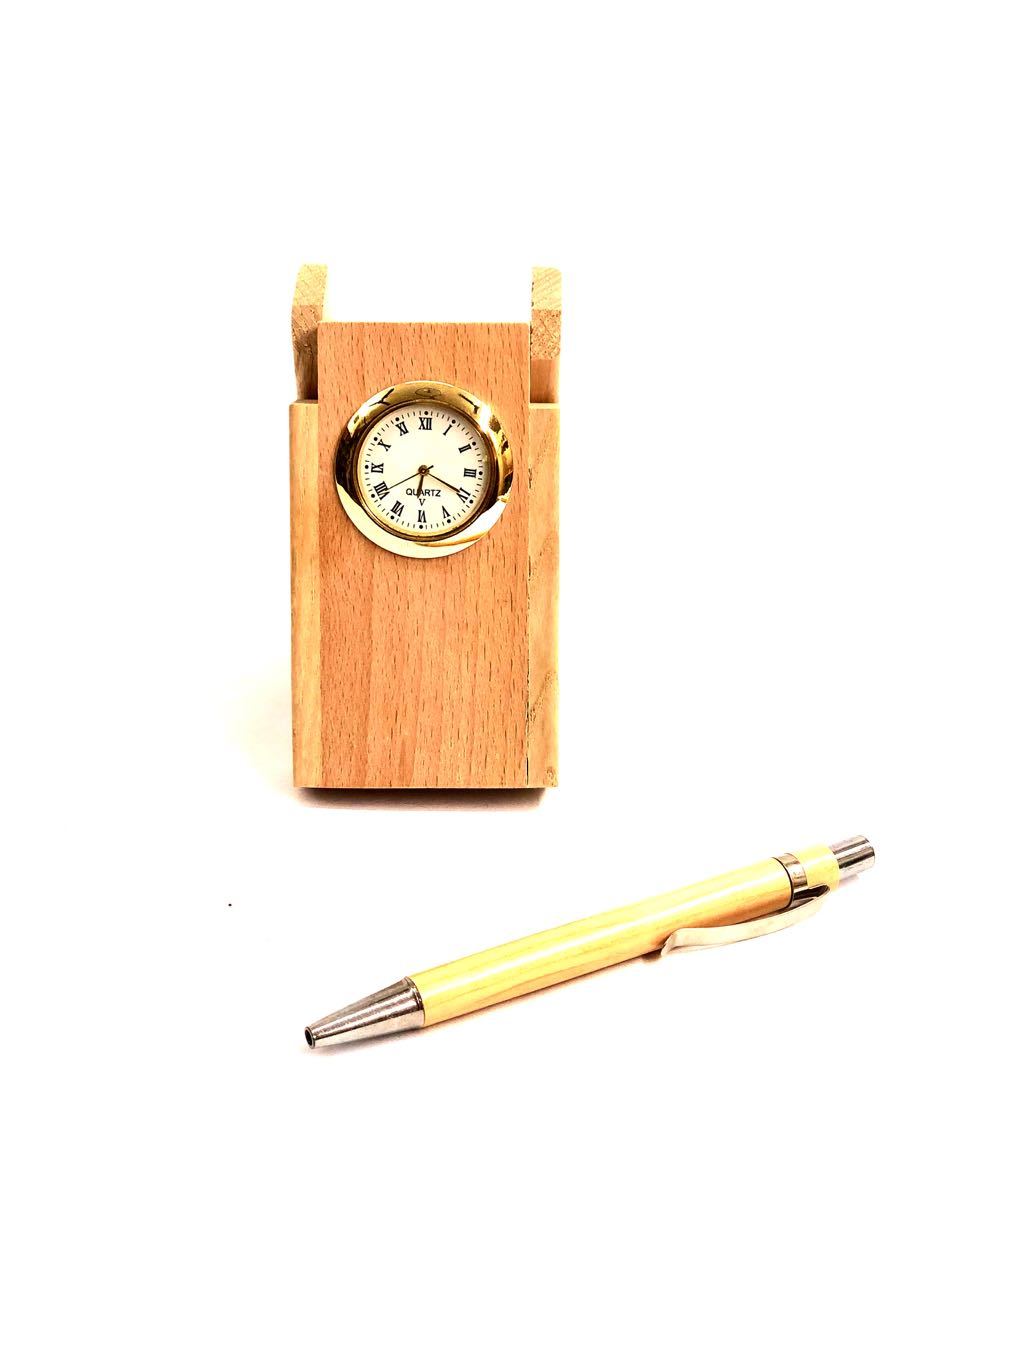 Excellent Quality Wood Stand With Pen & Clock Desk Utility By Tamrapatra